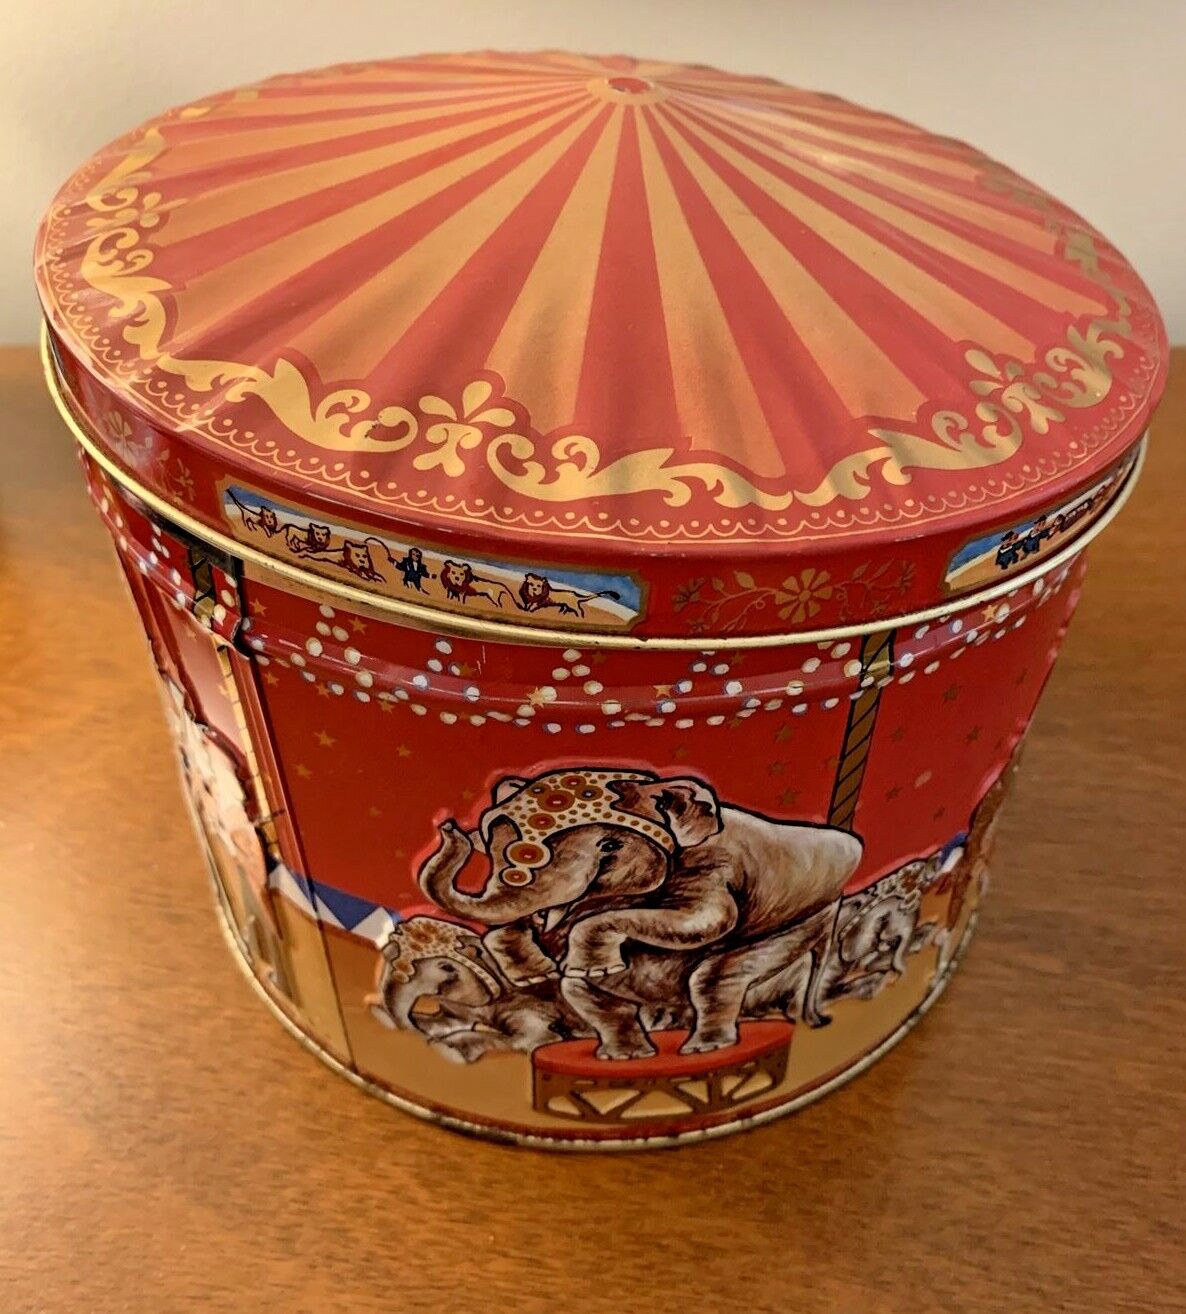 Vintage Poul Friis Big Top Circus Empty Metal Cookie Tin Featuring Elephants 3D